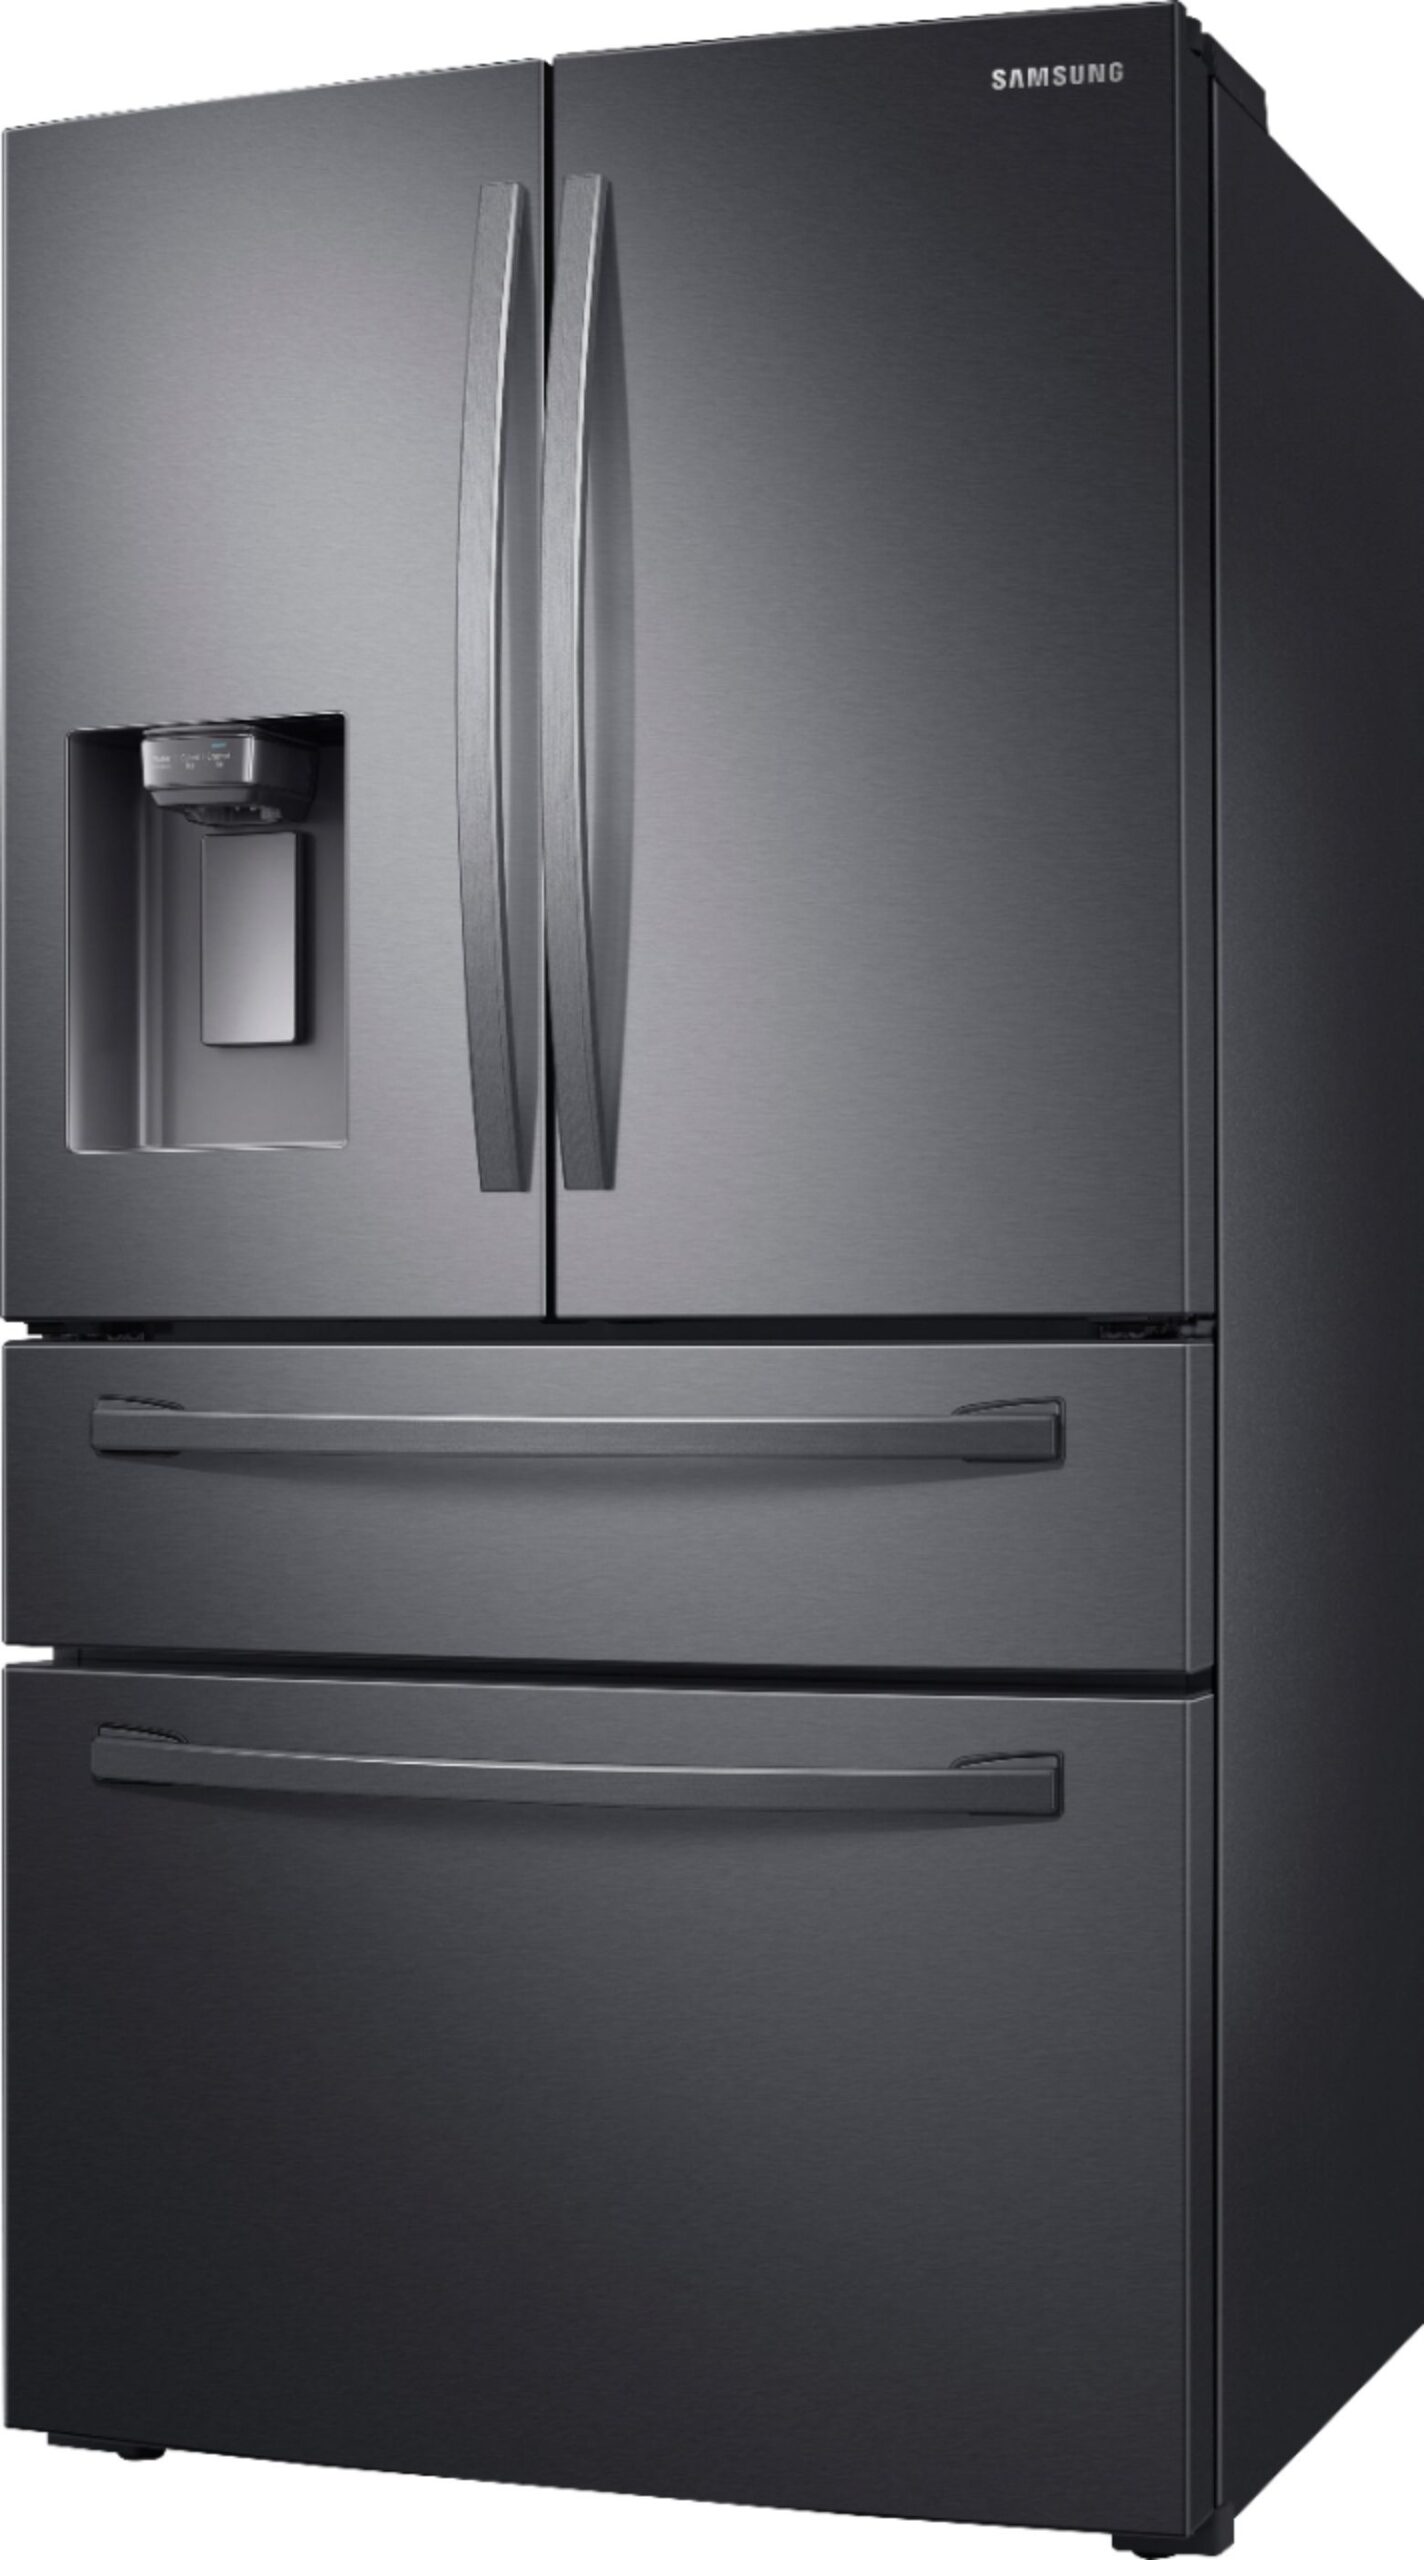 Samsung 27.3-cubic-foot Smart Side-by-Side Refrigerator